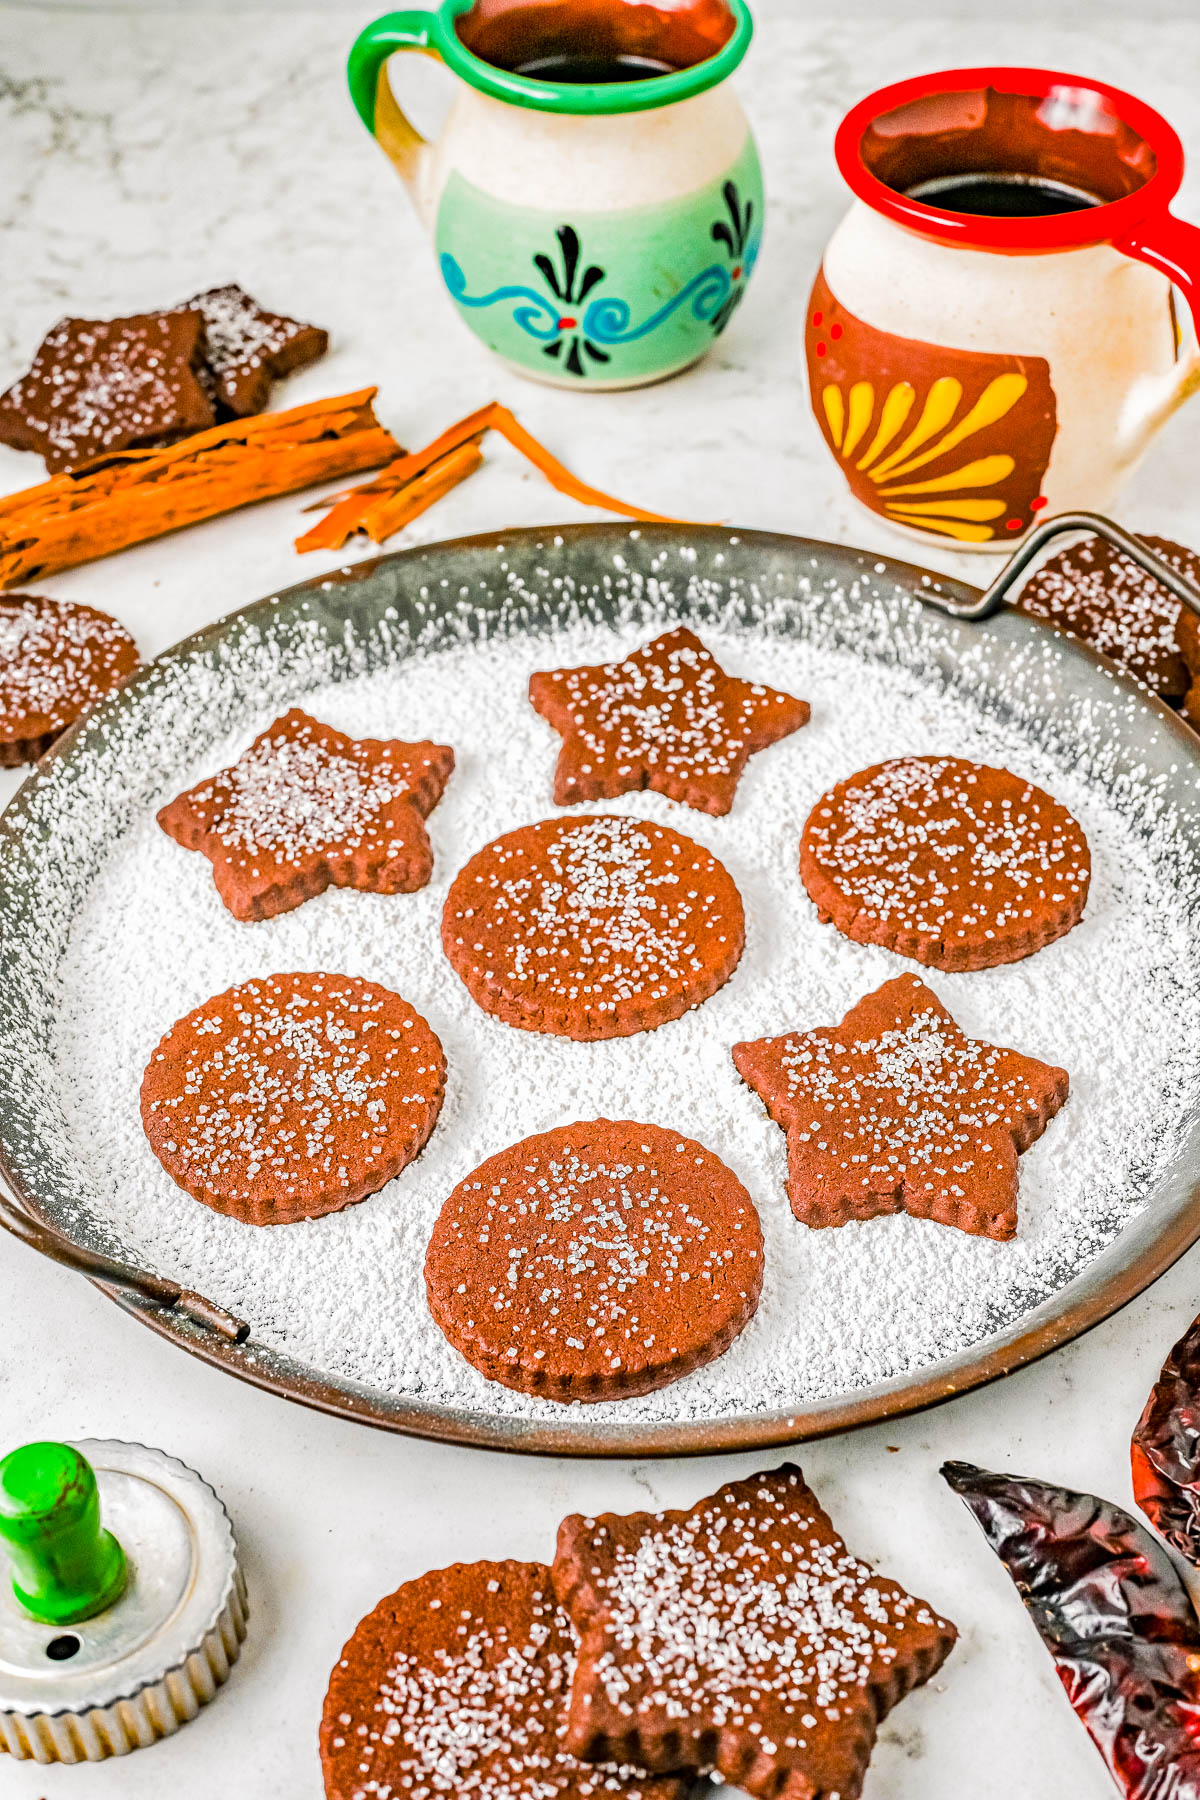 Mexican Chocolate Shortbread Cookies - These buttery shortbread cookies are full of chocolate, cinnamon-and-sugar, and a bit of spice thanks to a couple unique ingredients! They remind me of a good cup of Mexican hot chocolate, in cookie form. Great for cookie exchanges because they keep well and the perfect conversation piece cookie to set out at your next holiday party or fiesta! 